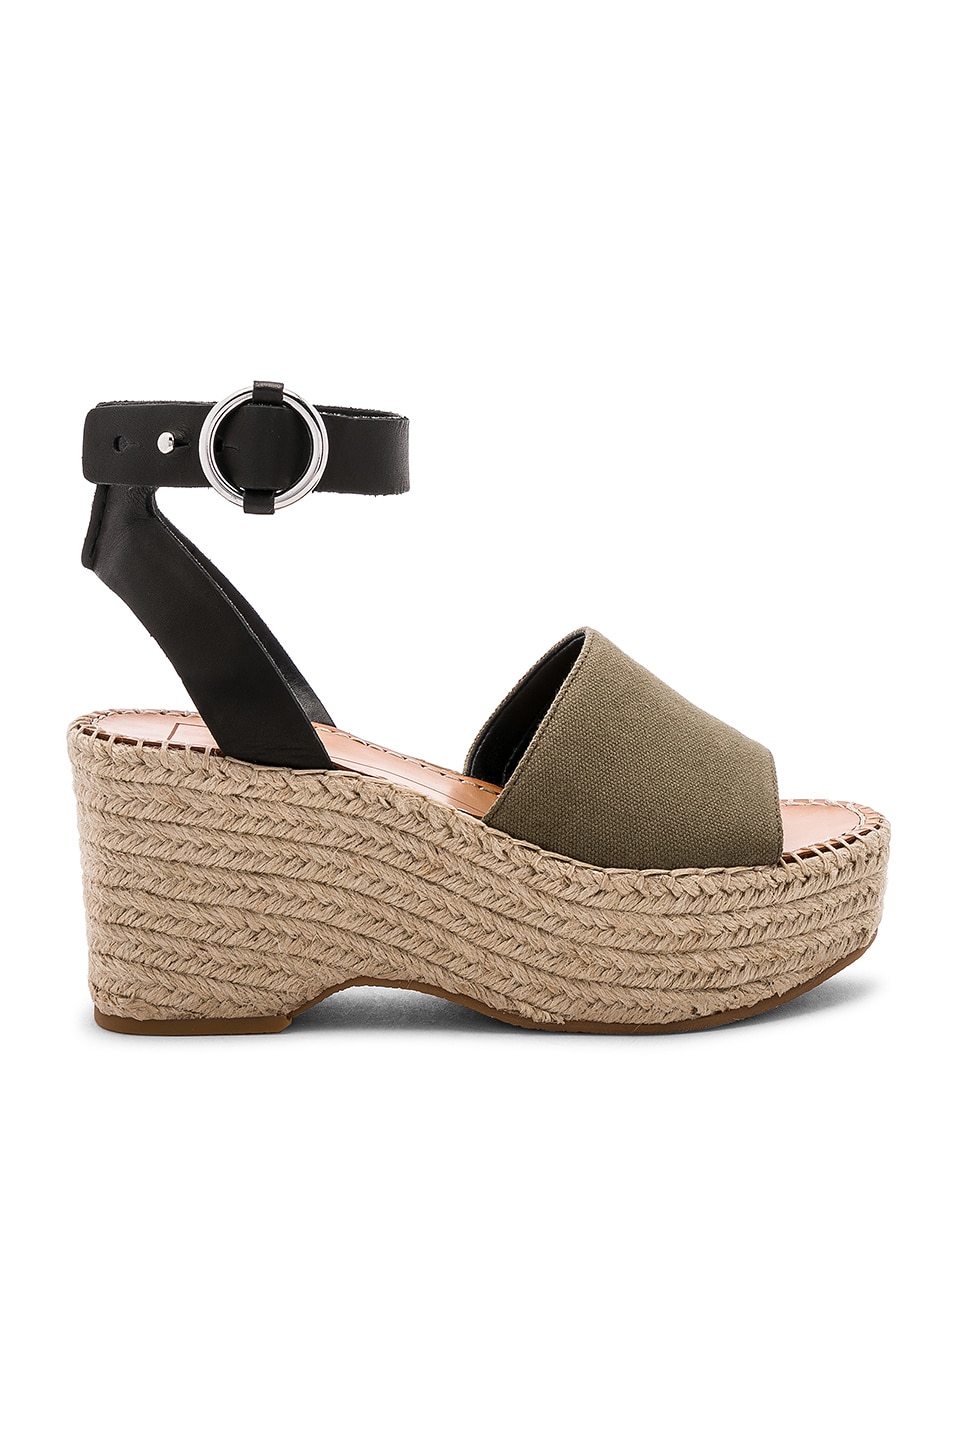 DOLCE VITA Lesly Wedge